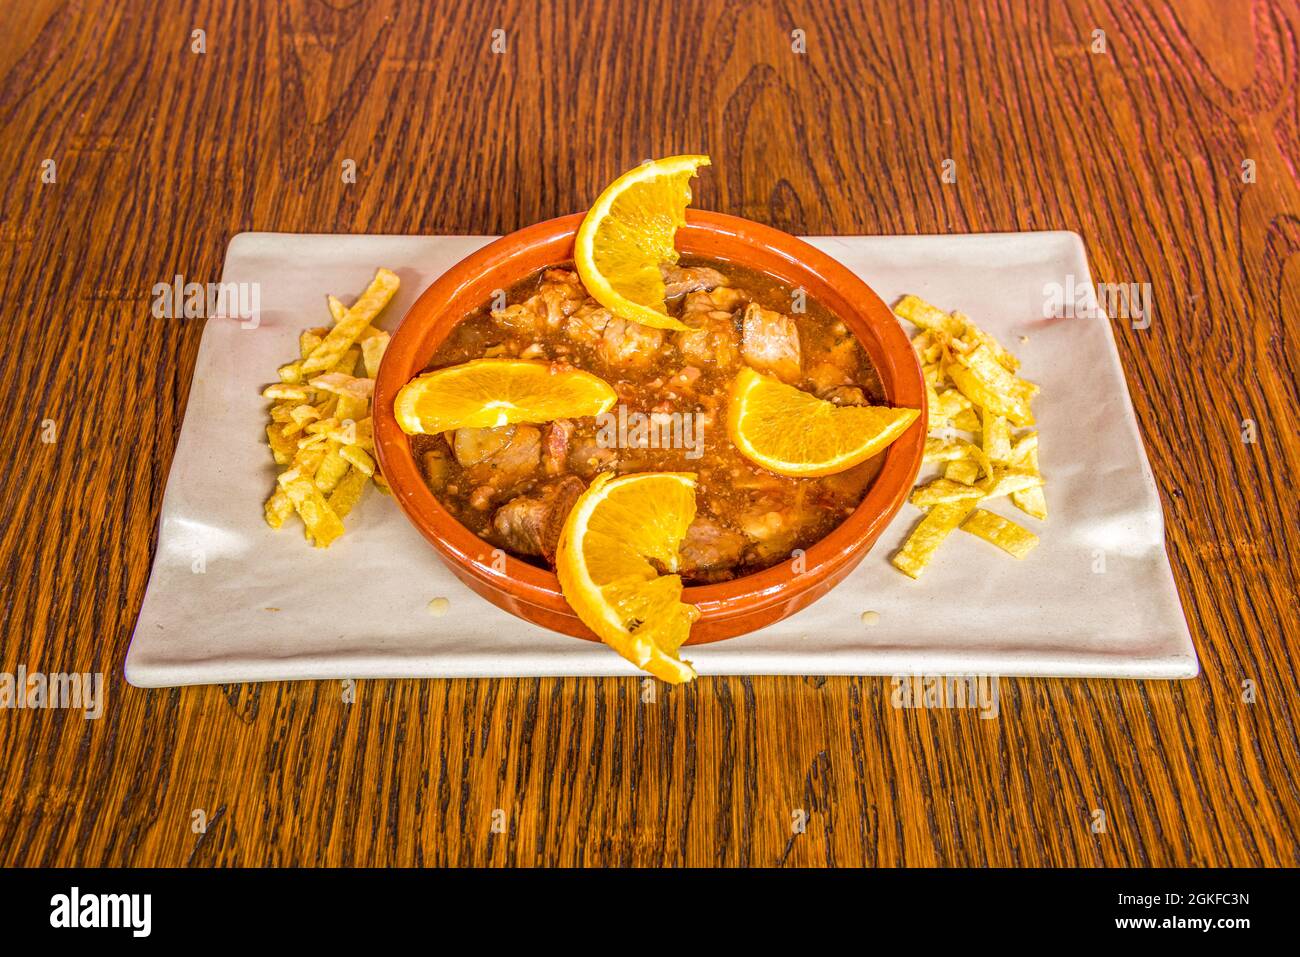 Clay pot plate with orange pork schnitzel stew and French fries on white plate Stock Photo